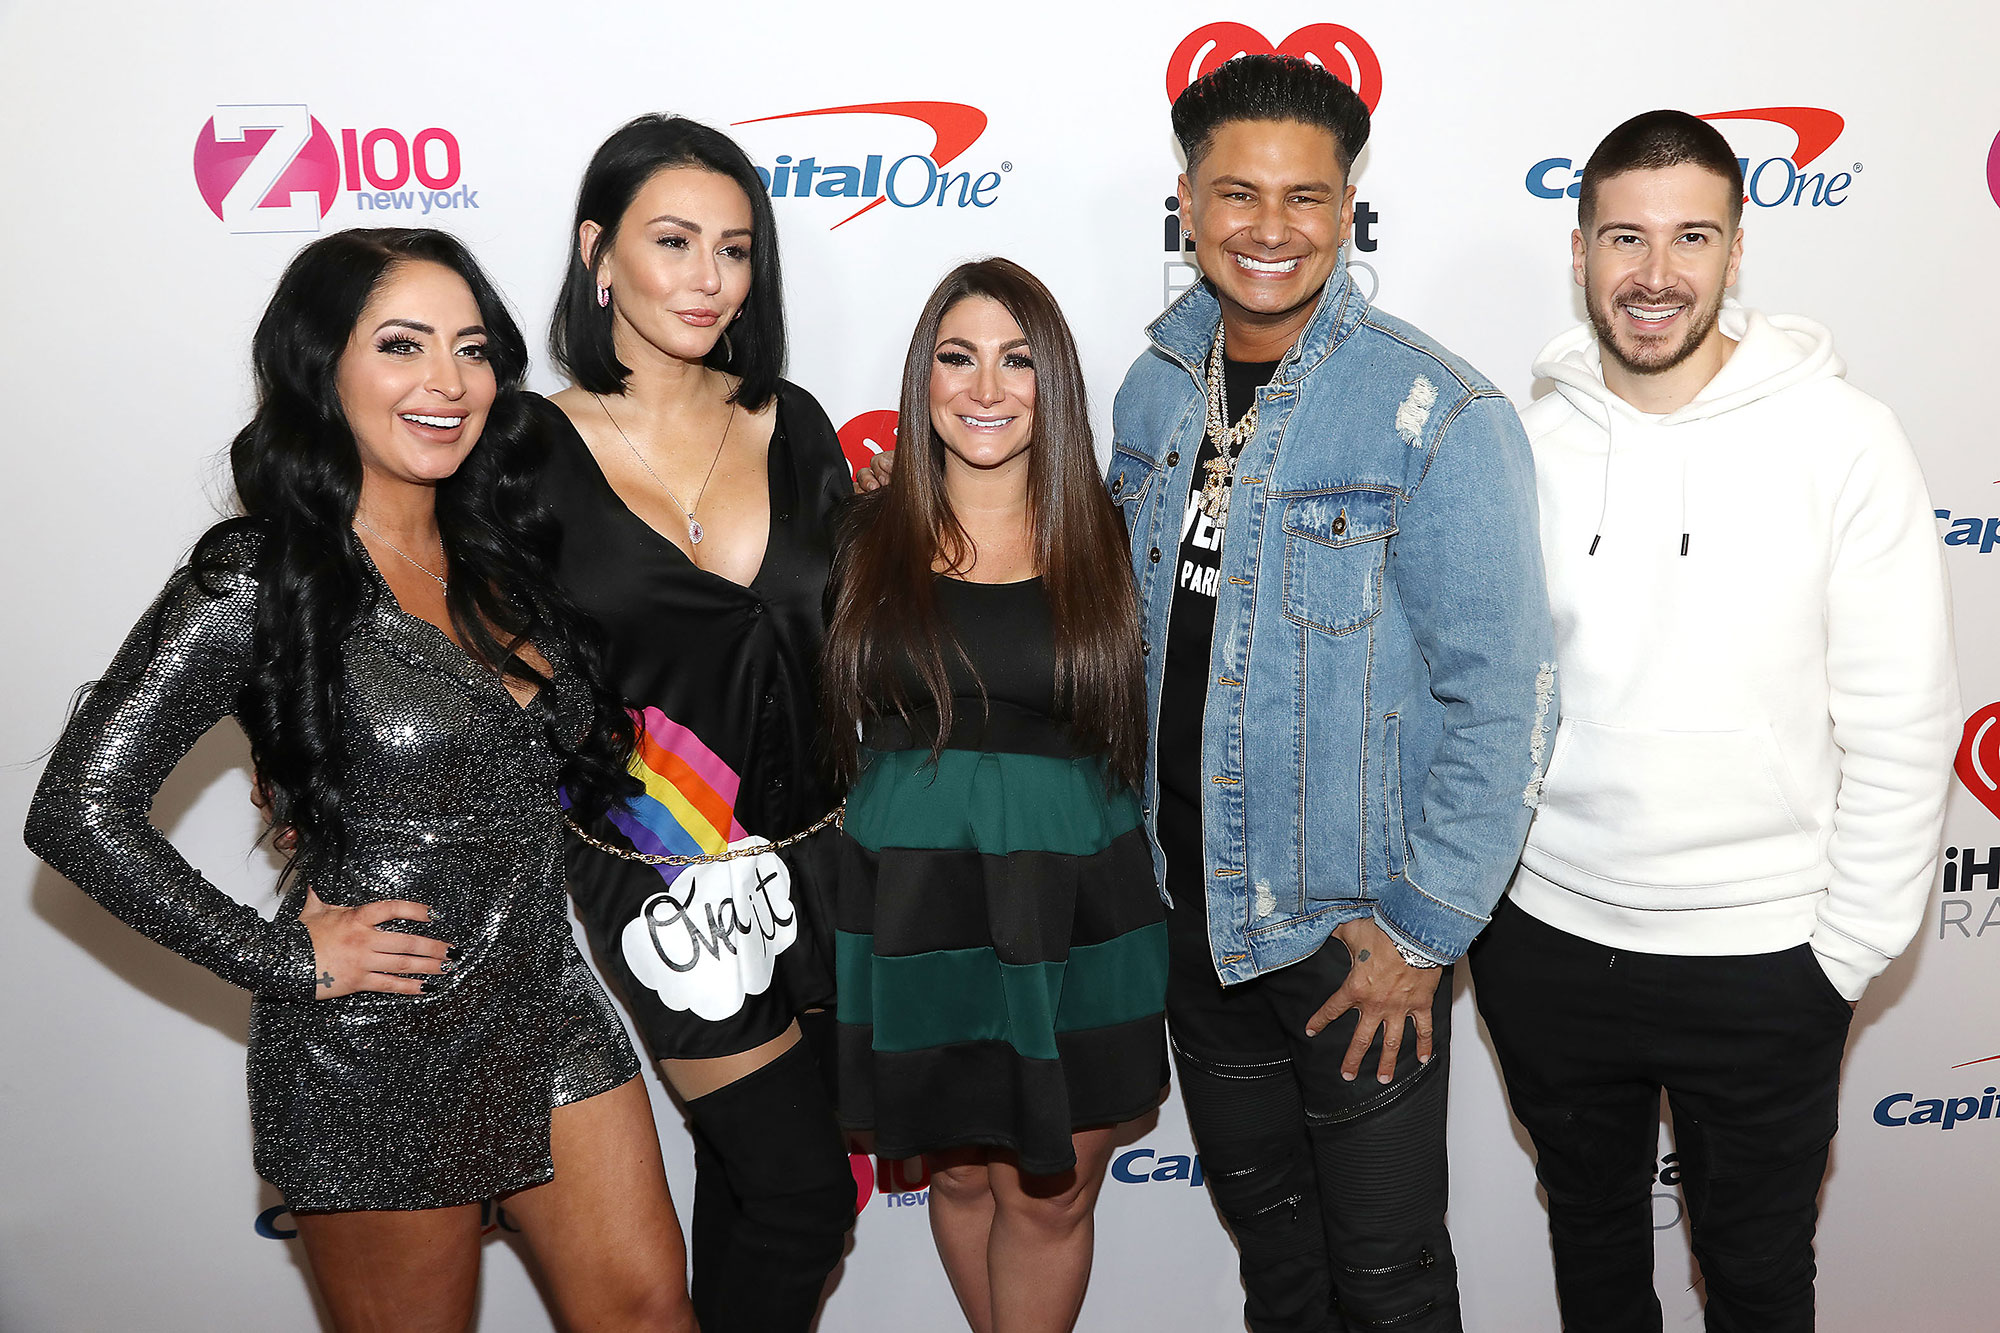 routine Een zekere Array Angelina Pivarnick and the 'Jersey Shore' Cast: Timeline of Drama